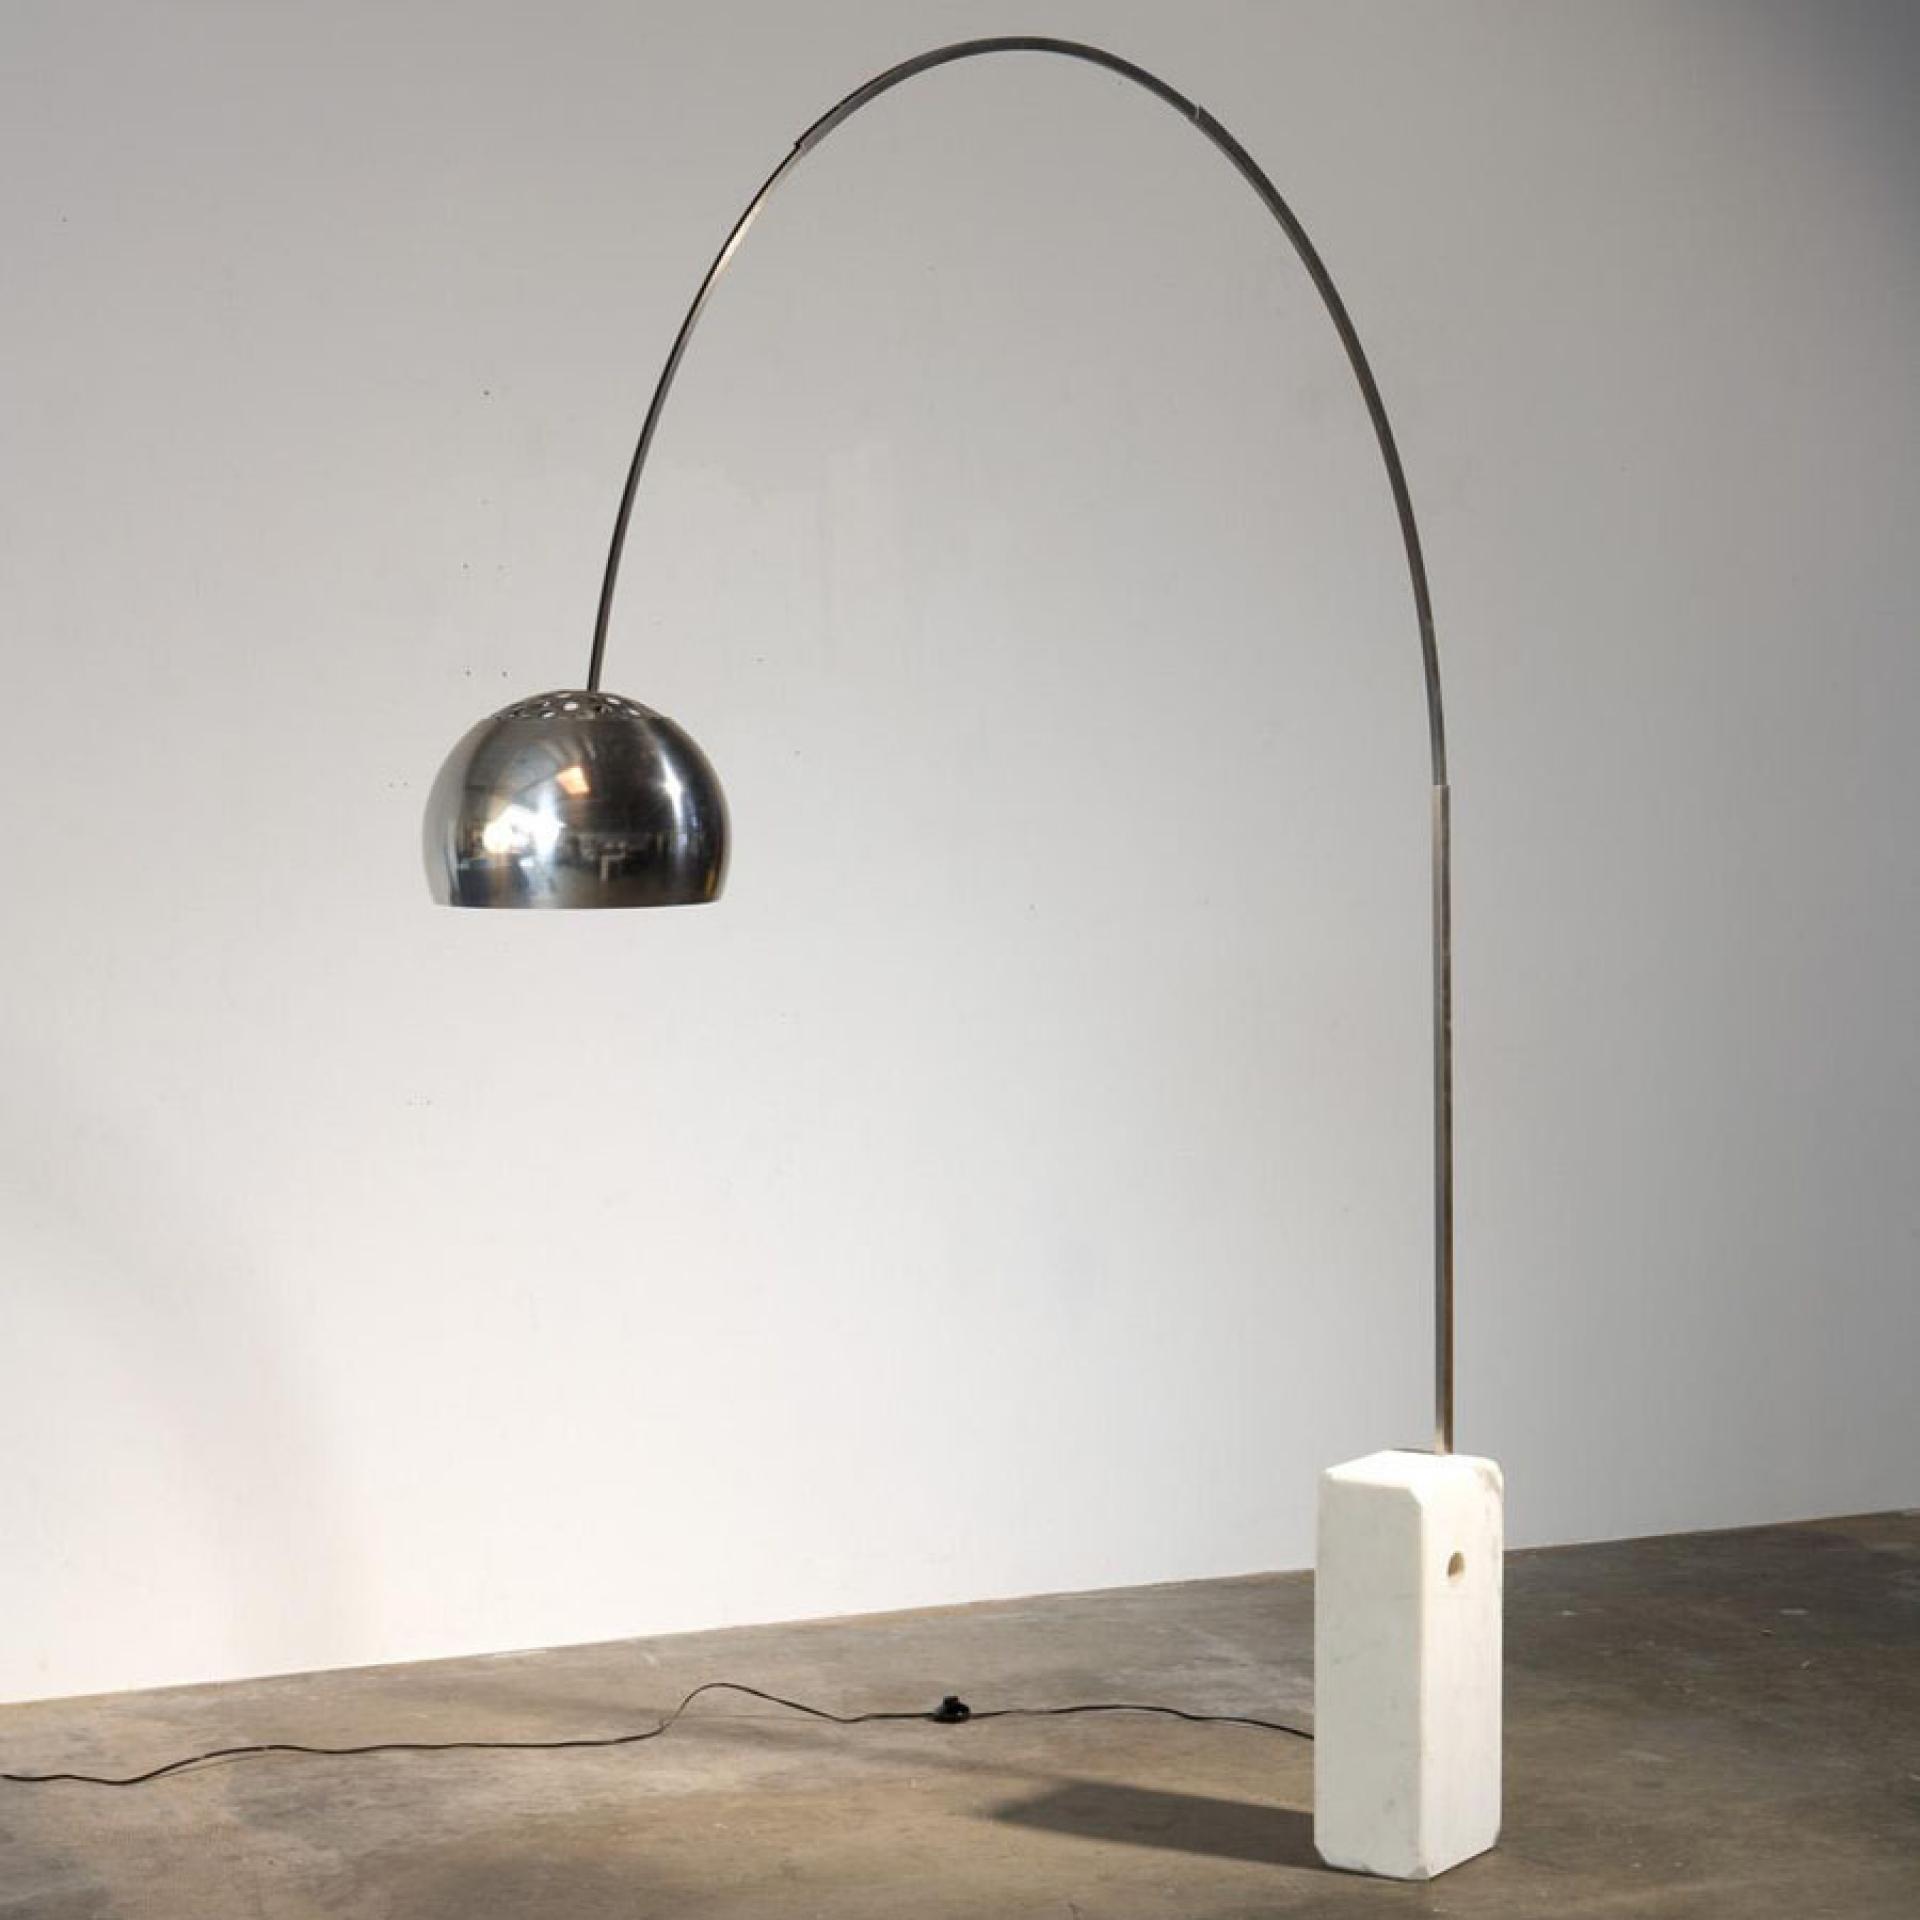 The Arco floor lamp for FLOS (unplugged), one of the two brothers’ masterpieces.